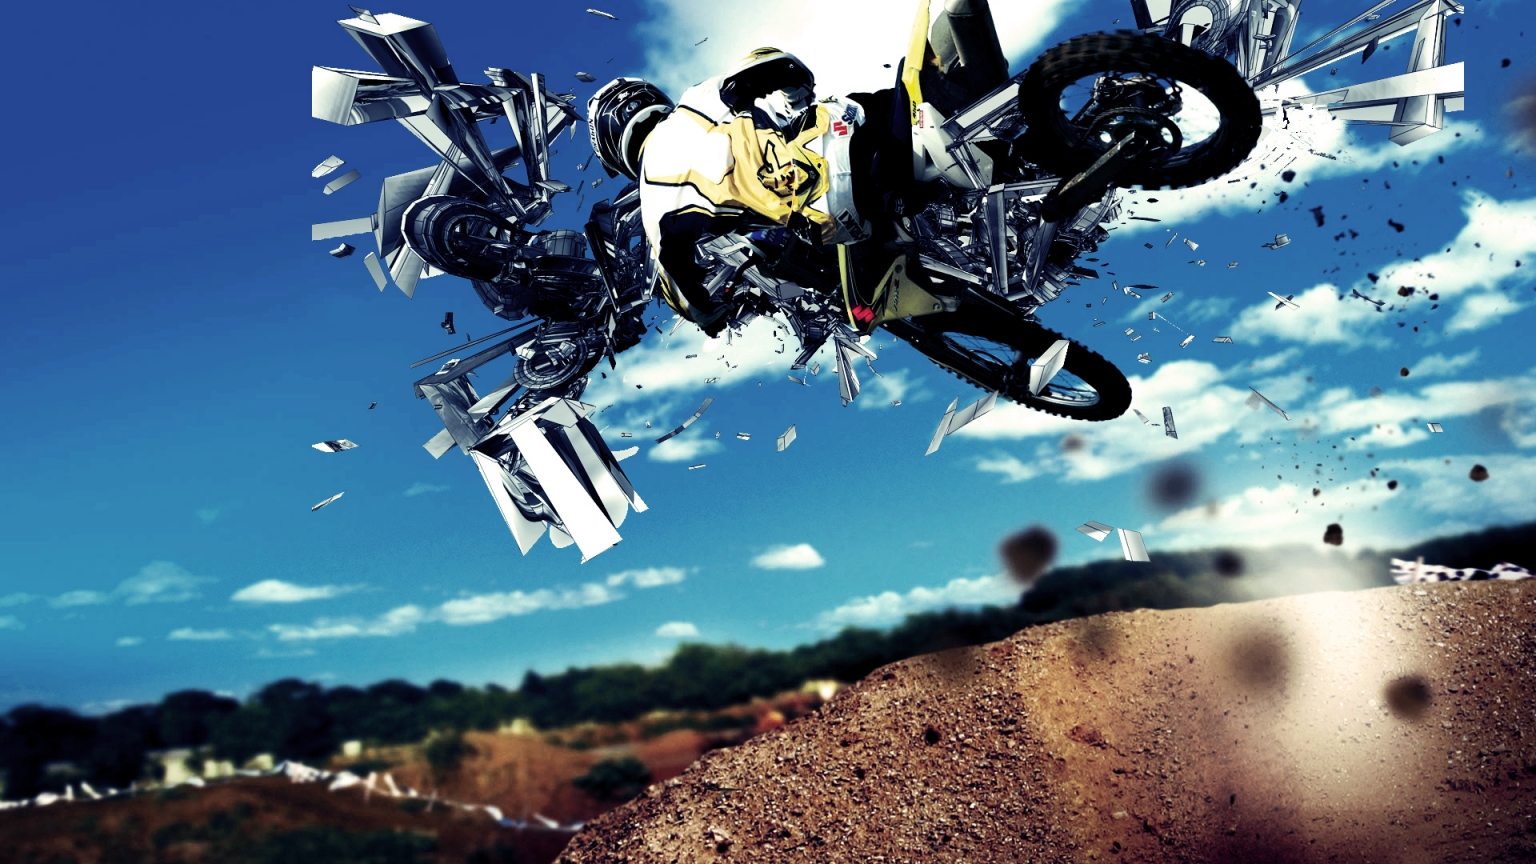 Motorcycle Race for 1536 x 864 HDTV resolution